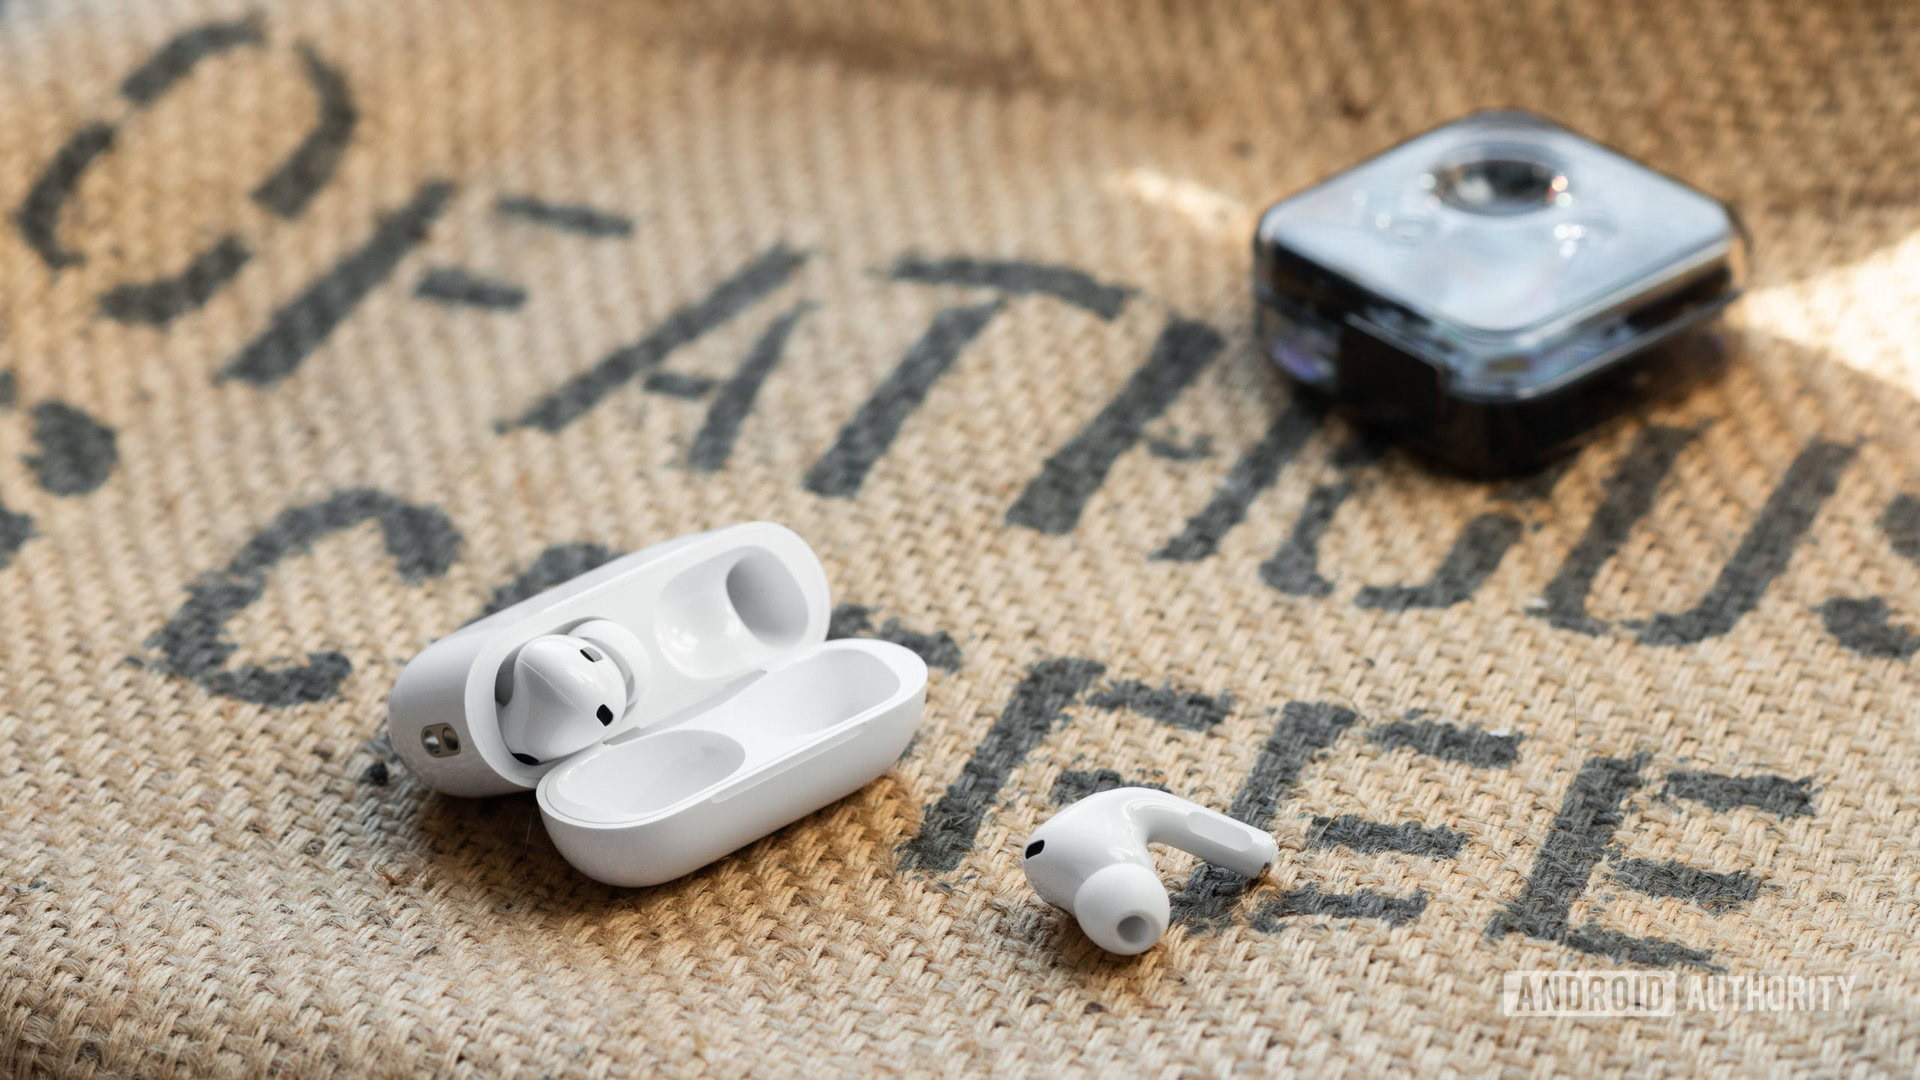 Apple Airpods Pro Nd Generation Review It All Adds Up Eu Vietnam Business Network Evbn